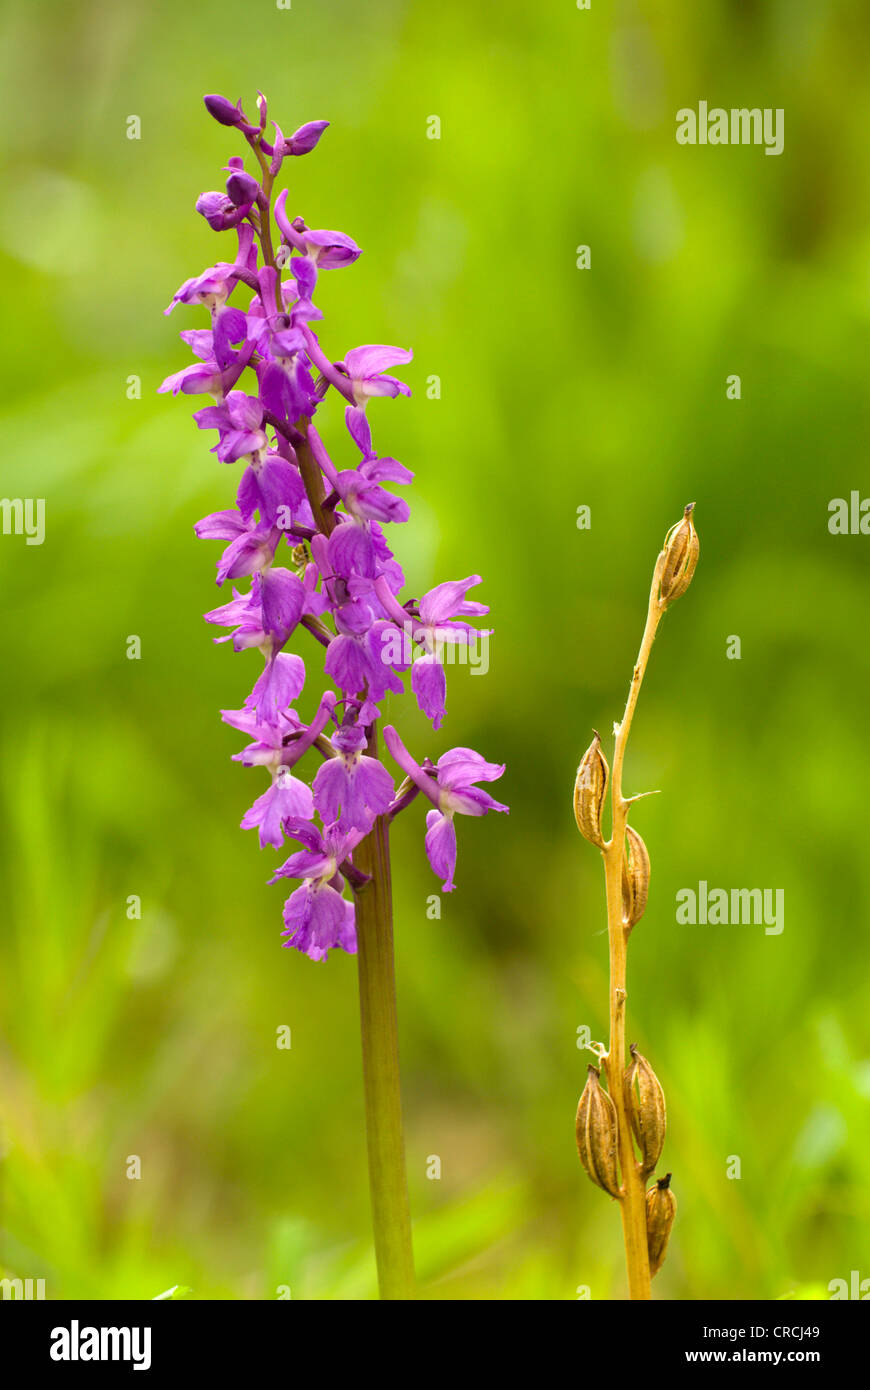 green-winged orchid, green-winged meadow orchid (Orchis morio), inflorescence and infructescence, Germany, Saarland Stock Photo